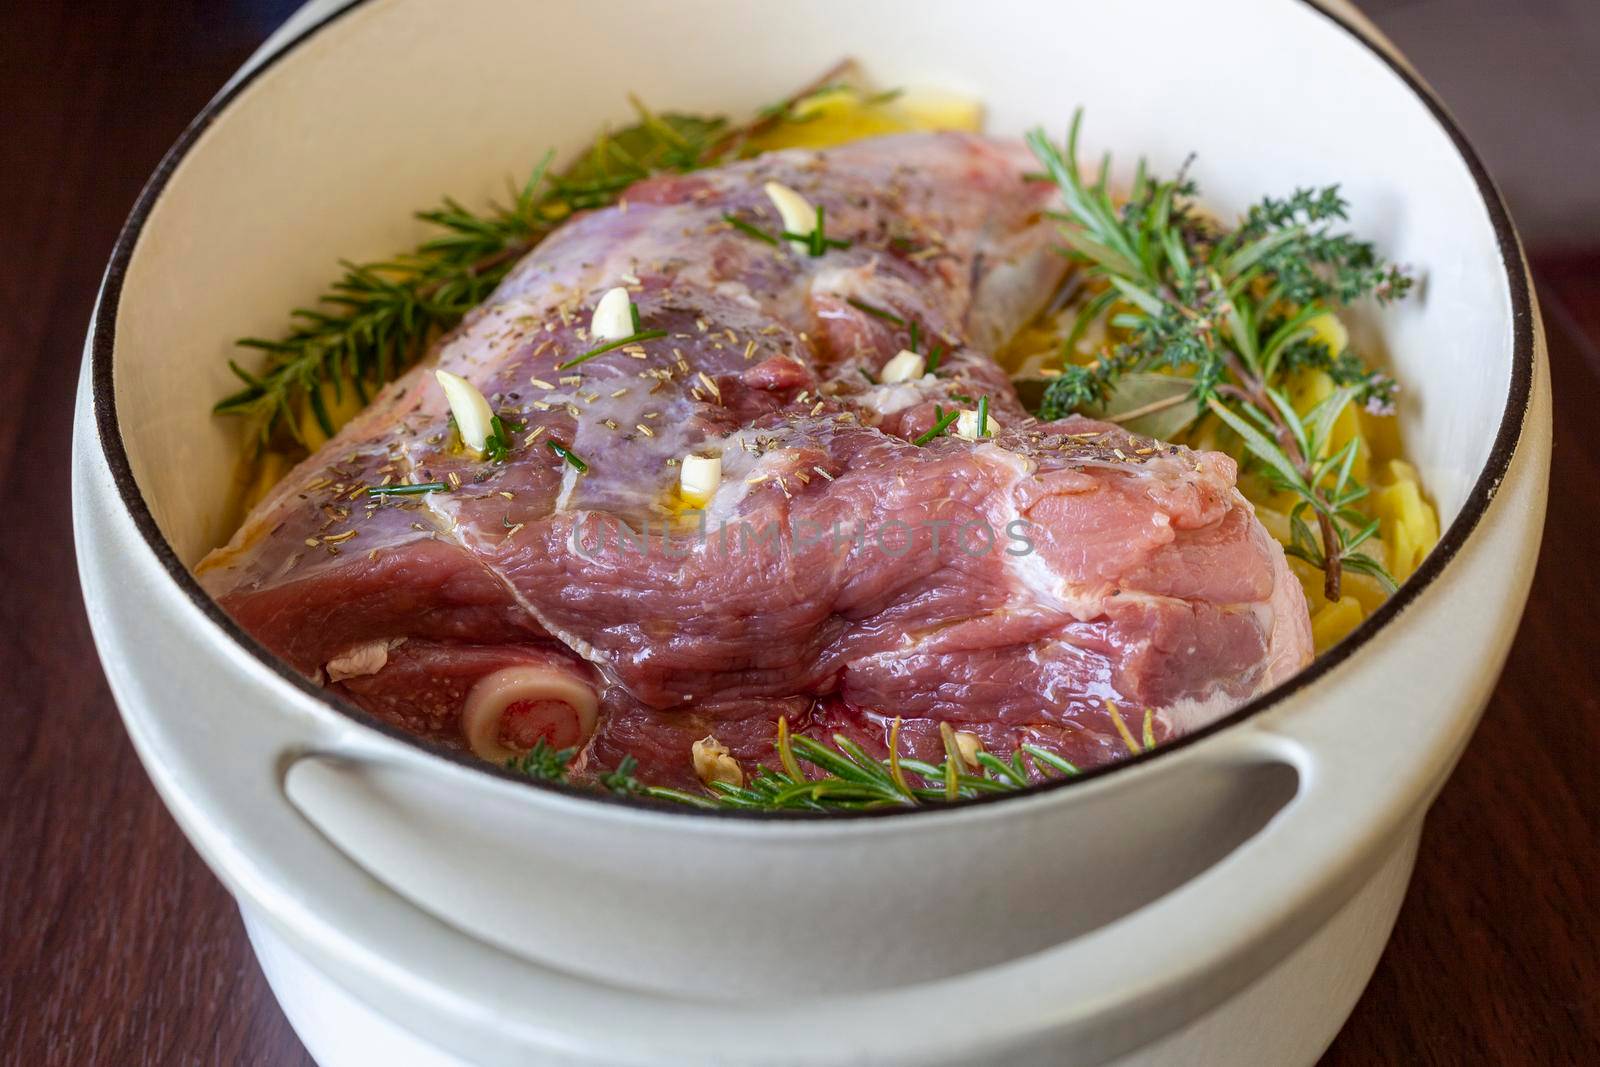 raw leg of lamb prepared to cook with sliced potatoes and provencal herbs, top view